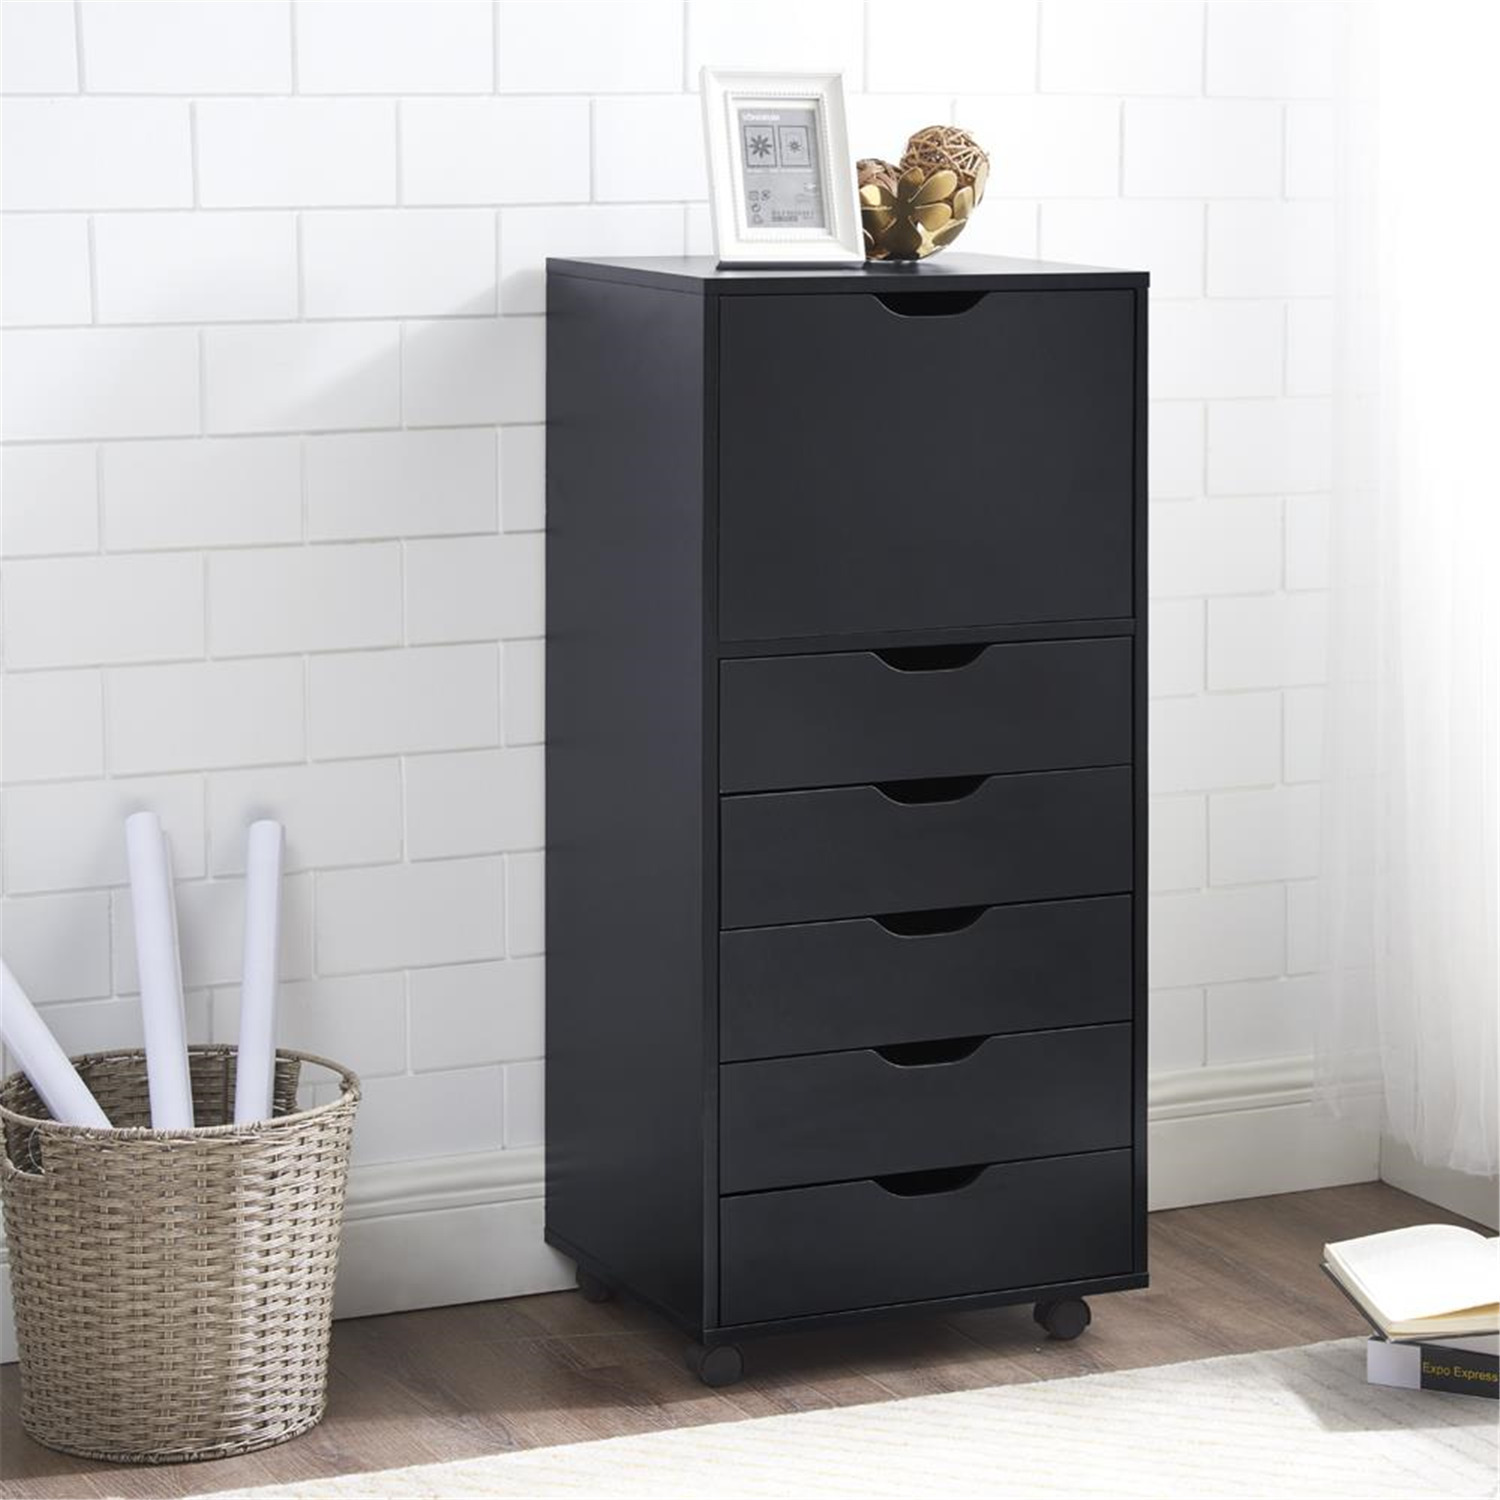 Office File Cabinets Wooden File Cabinets for Home Office Lateral File Cabinet Wood File Cabinet Mobile File Cabinet Mobile Storage Cabinet Filing Storage Drawer Cabinet by Naomi Home Black / 6 Drawer - image 1 of 5